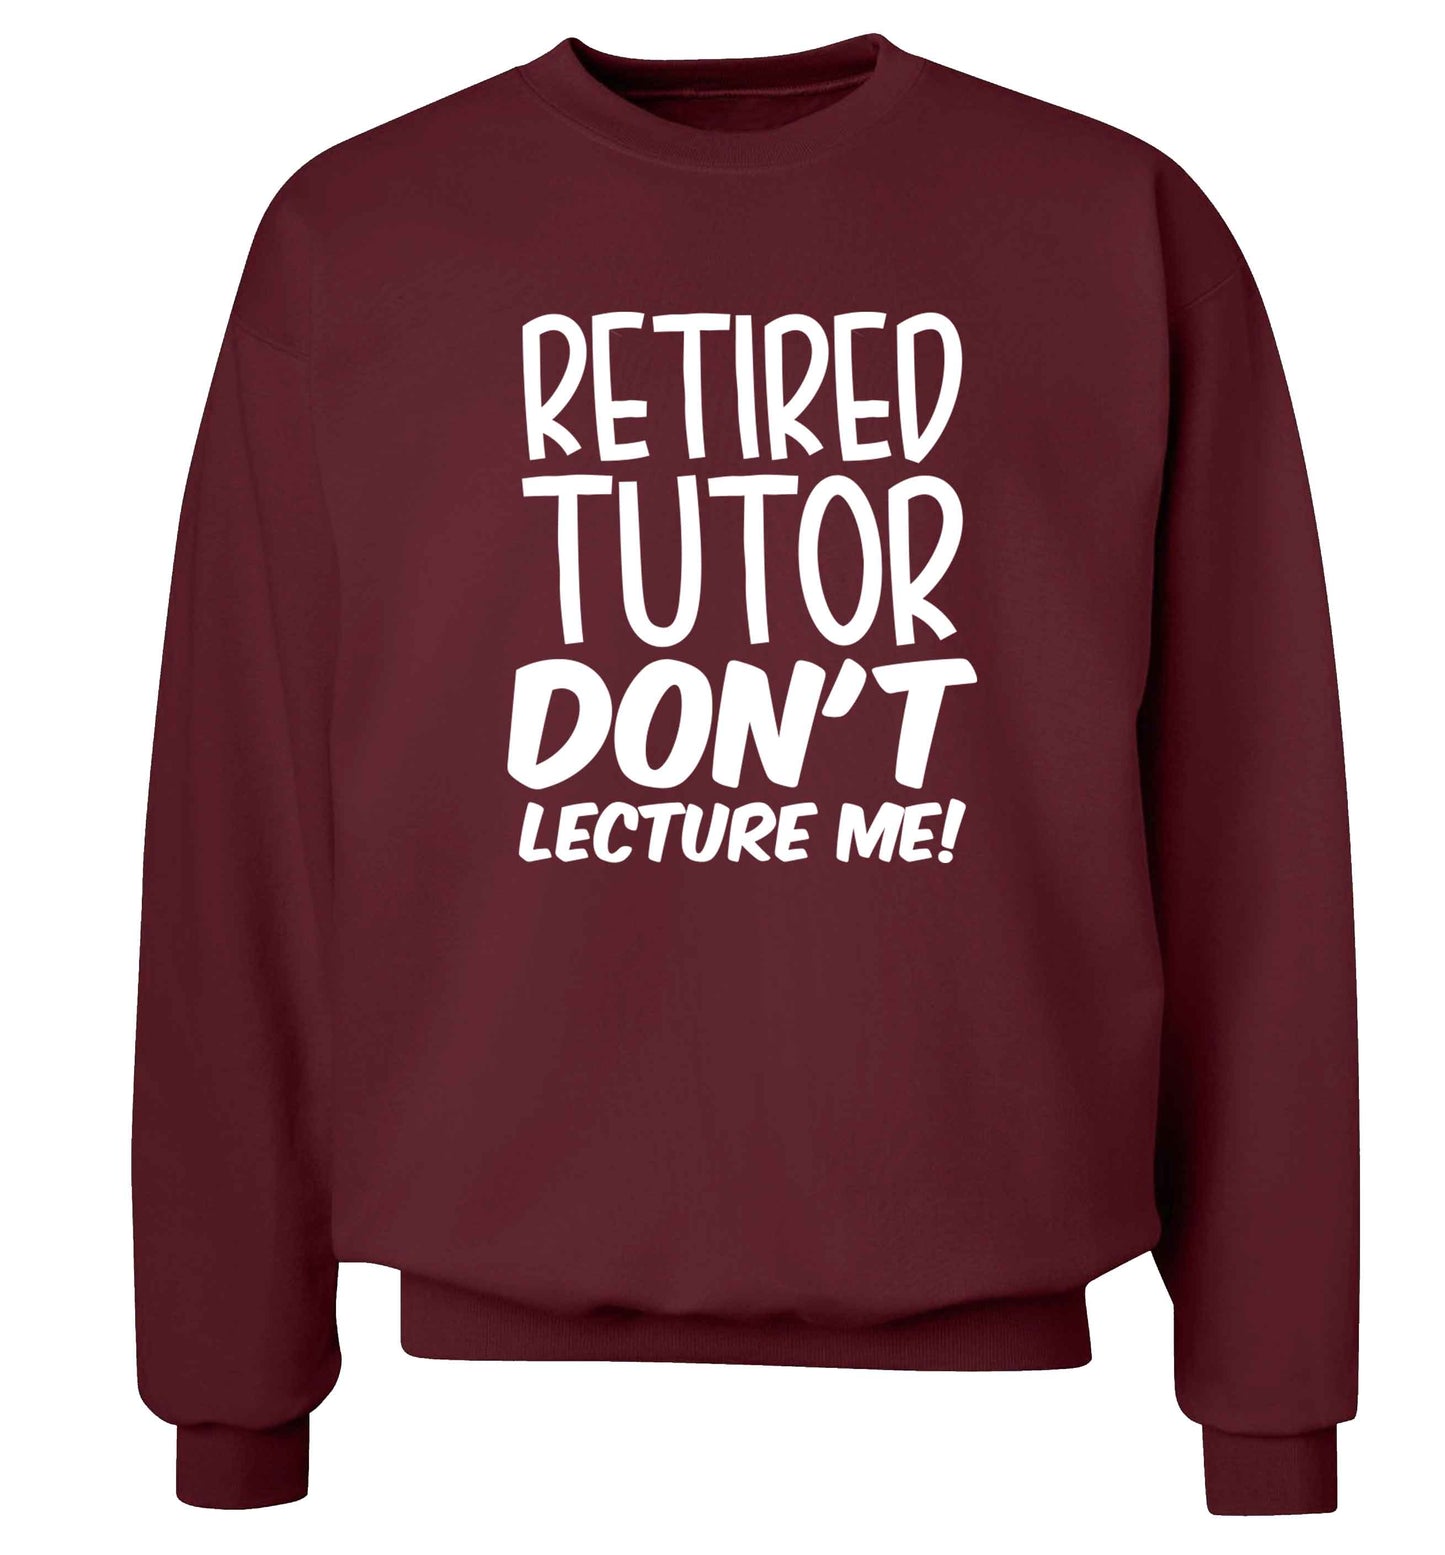 Retired tutor don't lecture me! Adult's unisex maroon Sweater 2XL